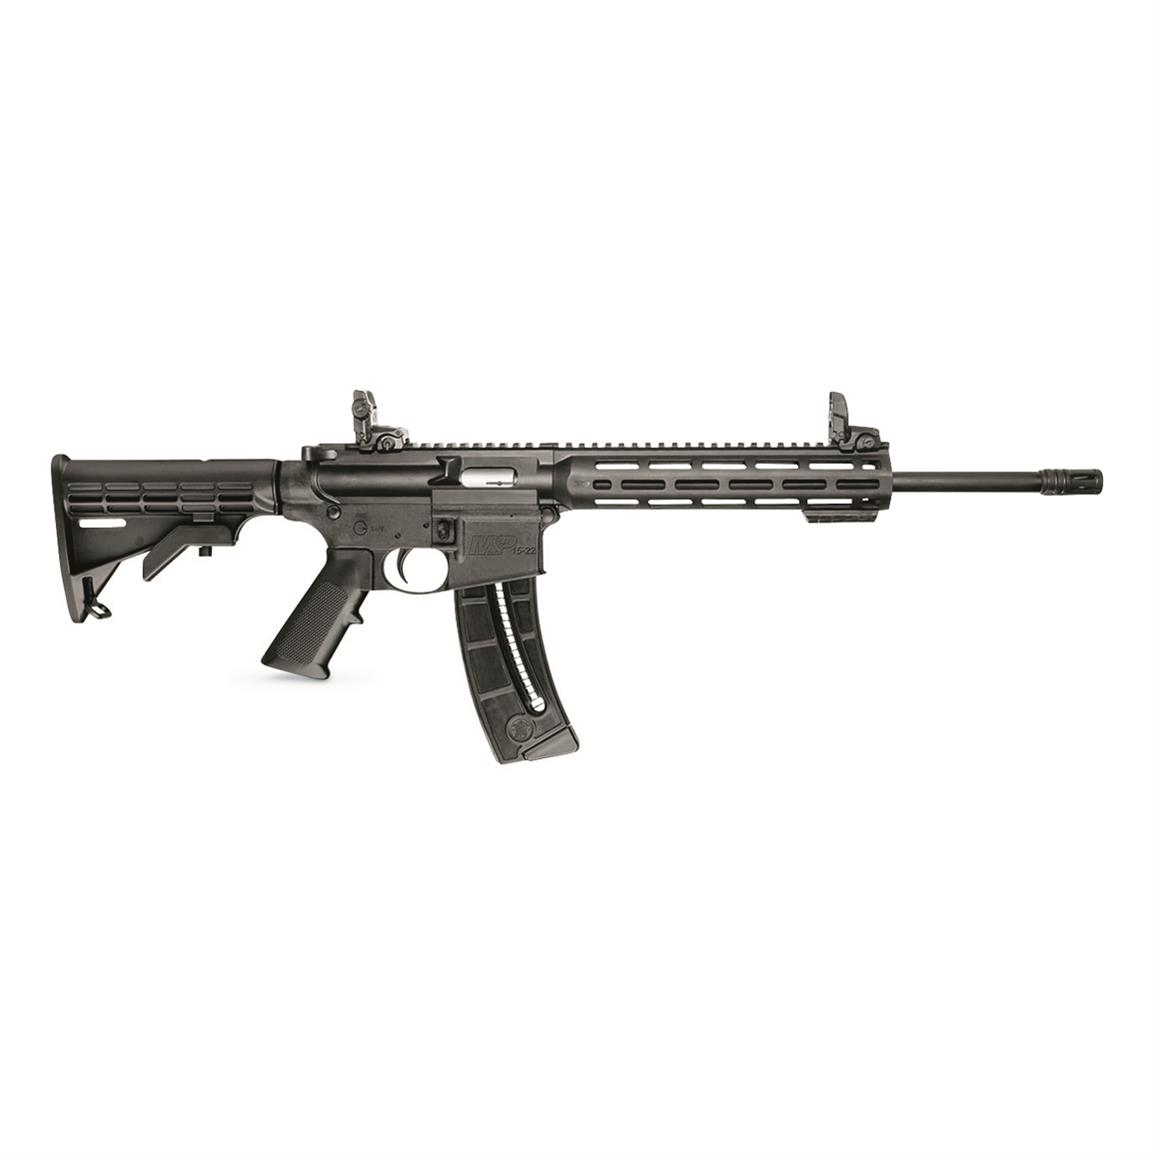 Smith & Wesson M&P15-22 Sport, Semi-Automatic, .22LR, 25+1 Rounds